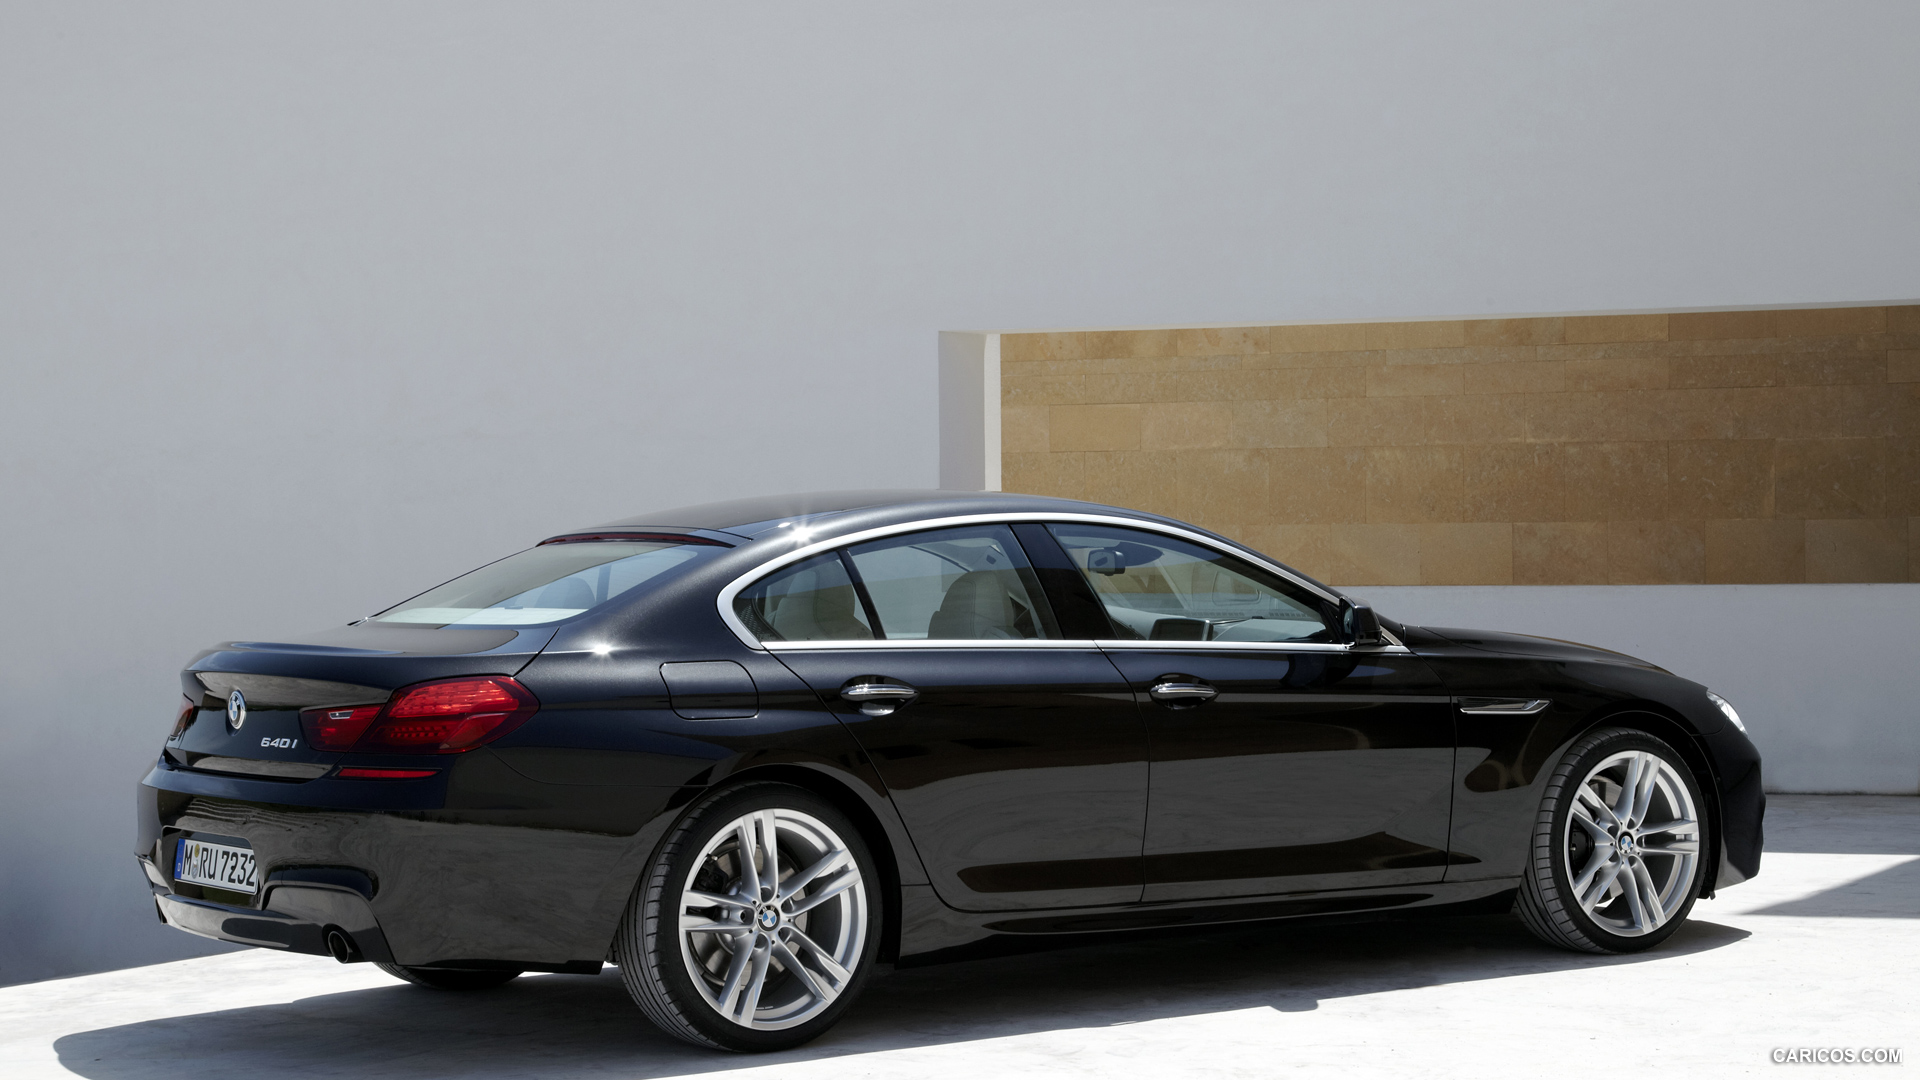 2013_bmw_6-series_640d_and_640i_gran_coupe_146_1920x1080.jpg